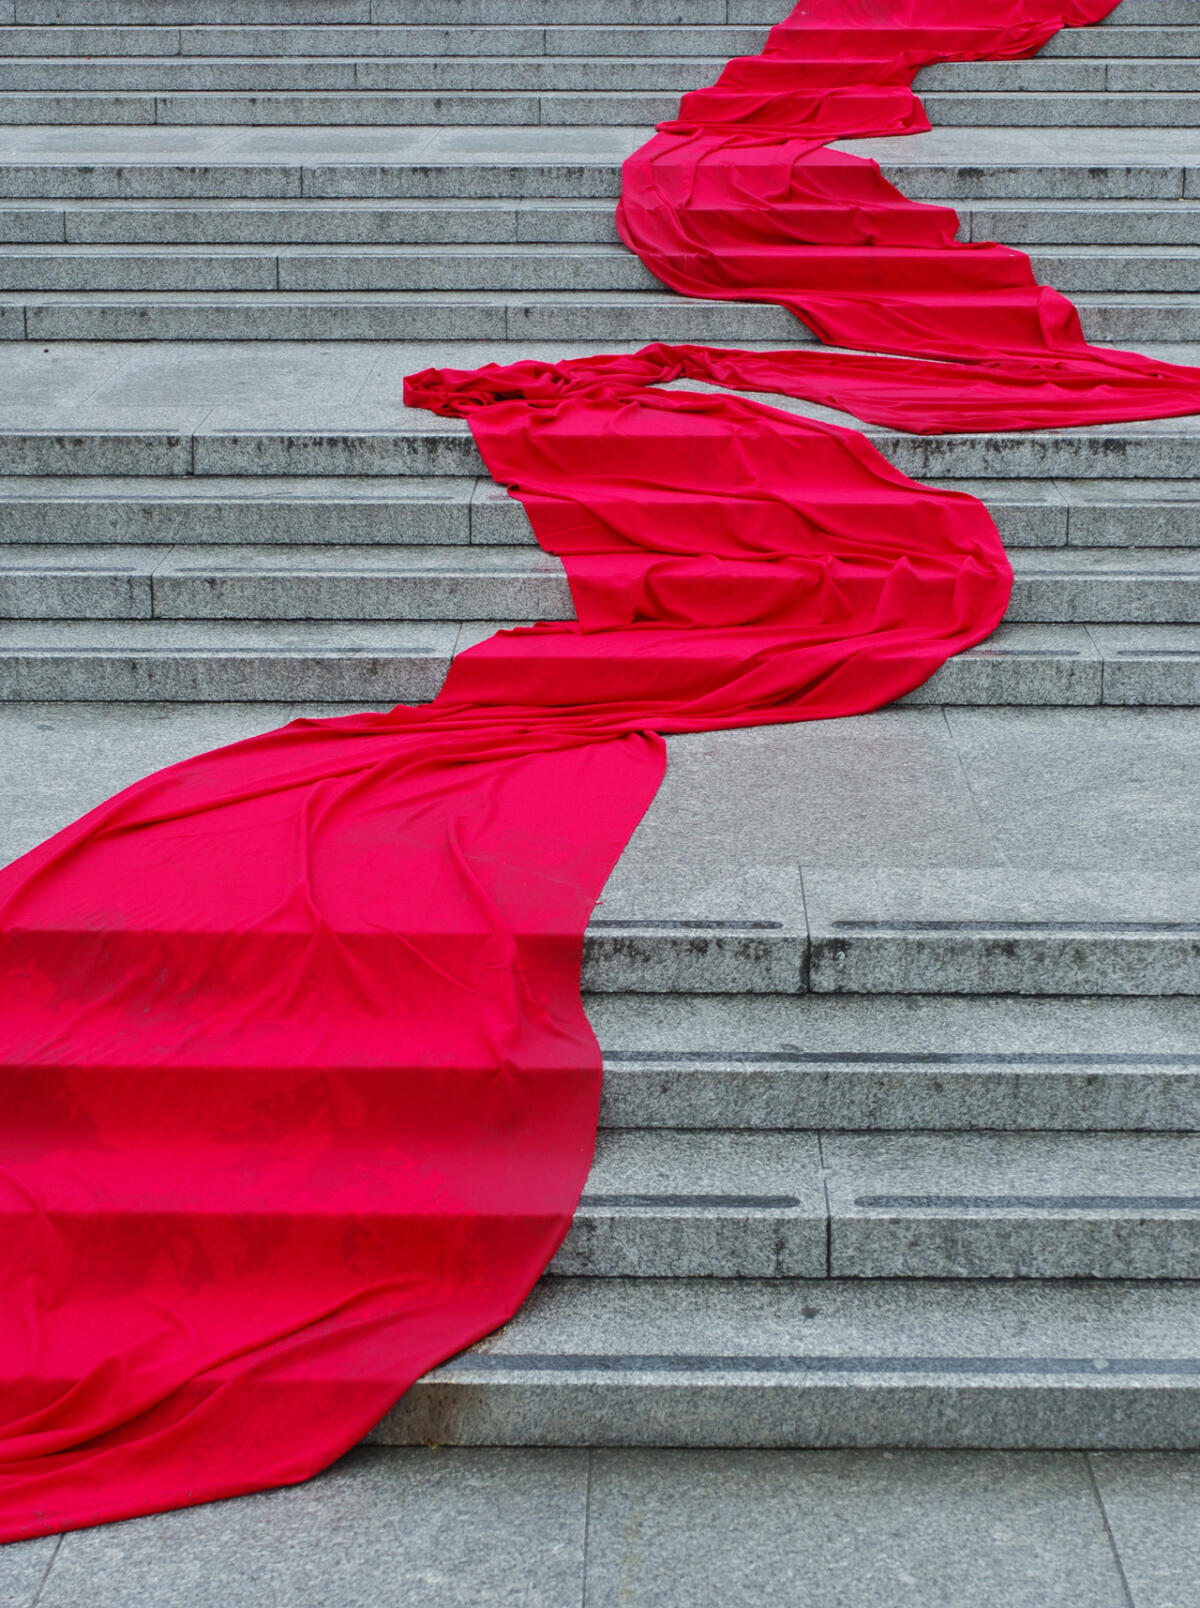 red material draped over concrete steps